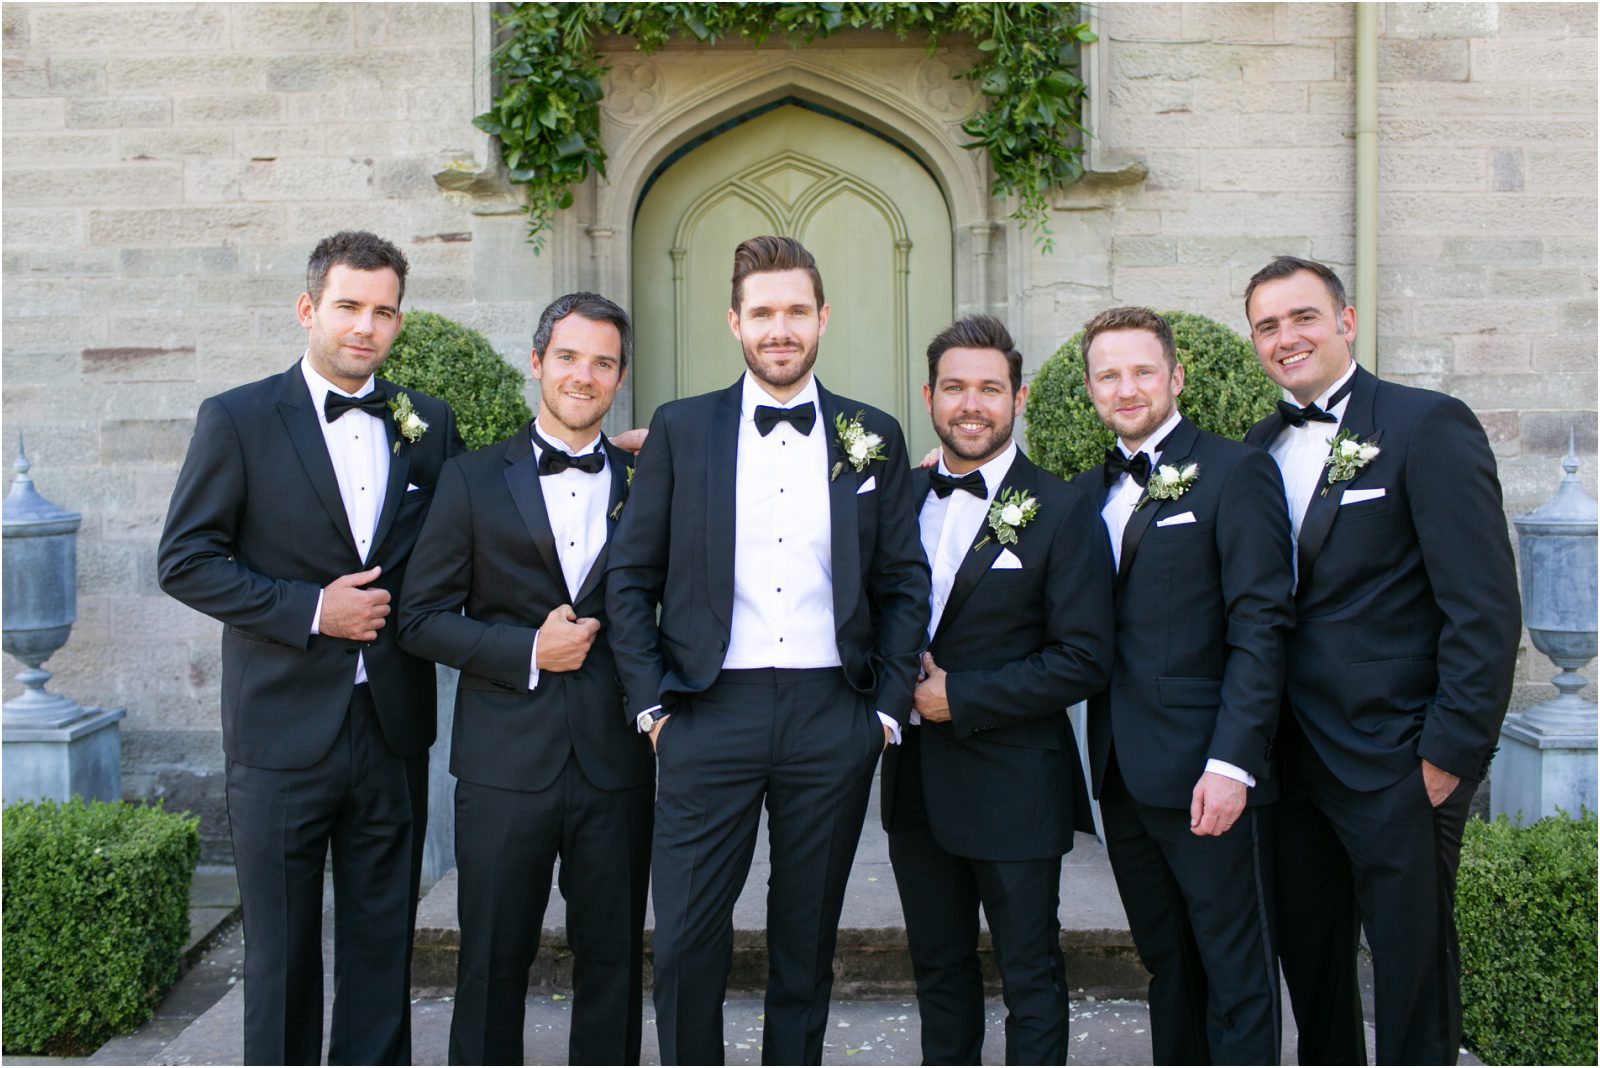 Grooms party wearing tuxedos